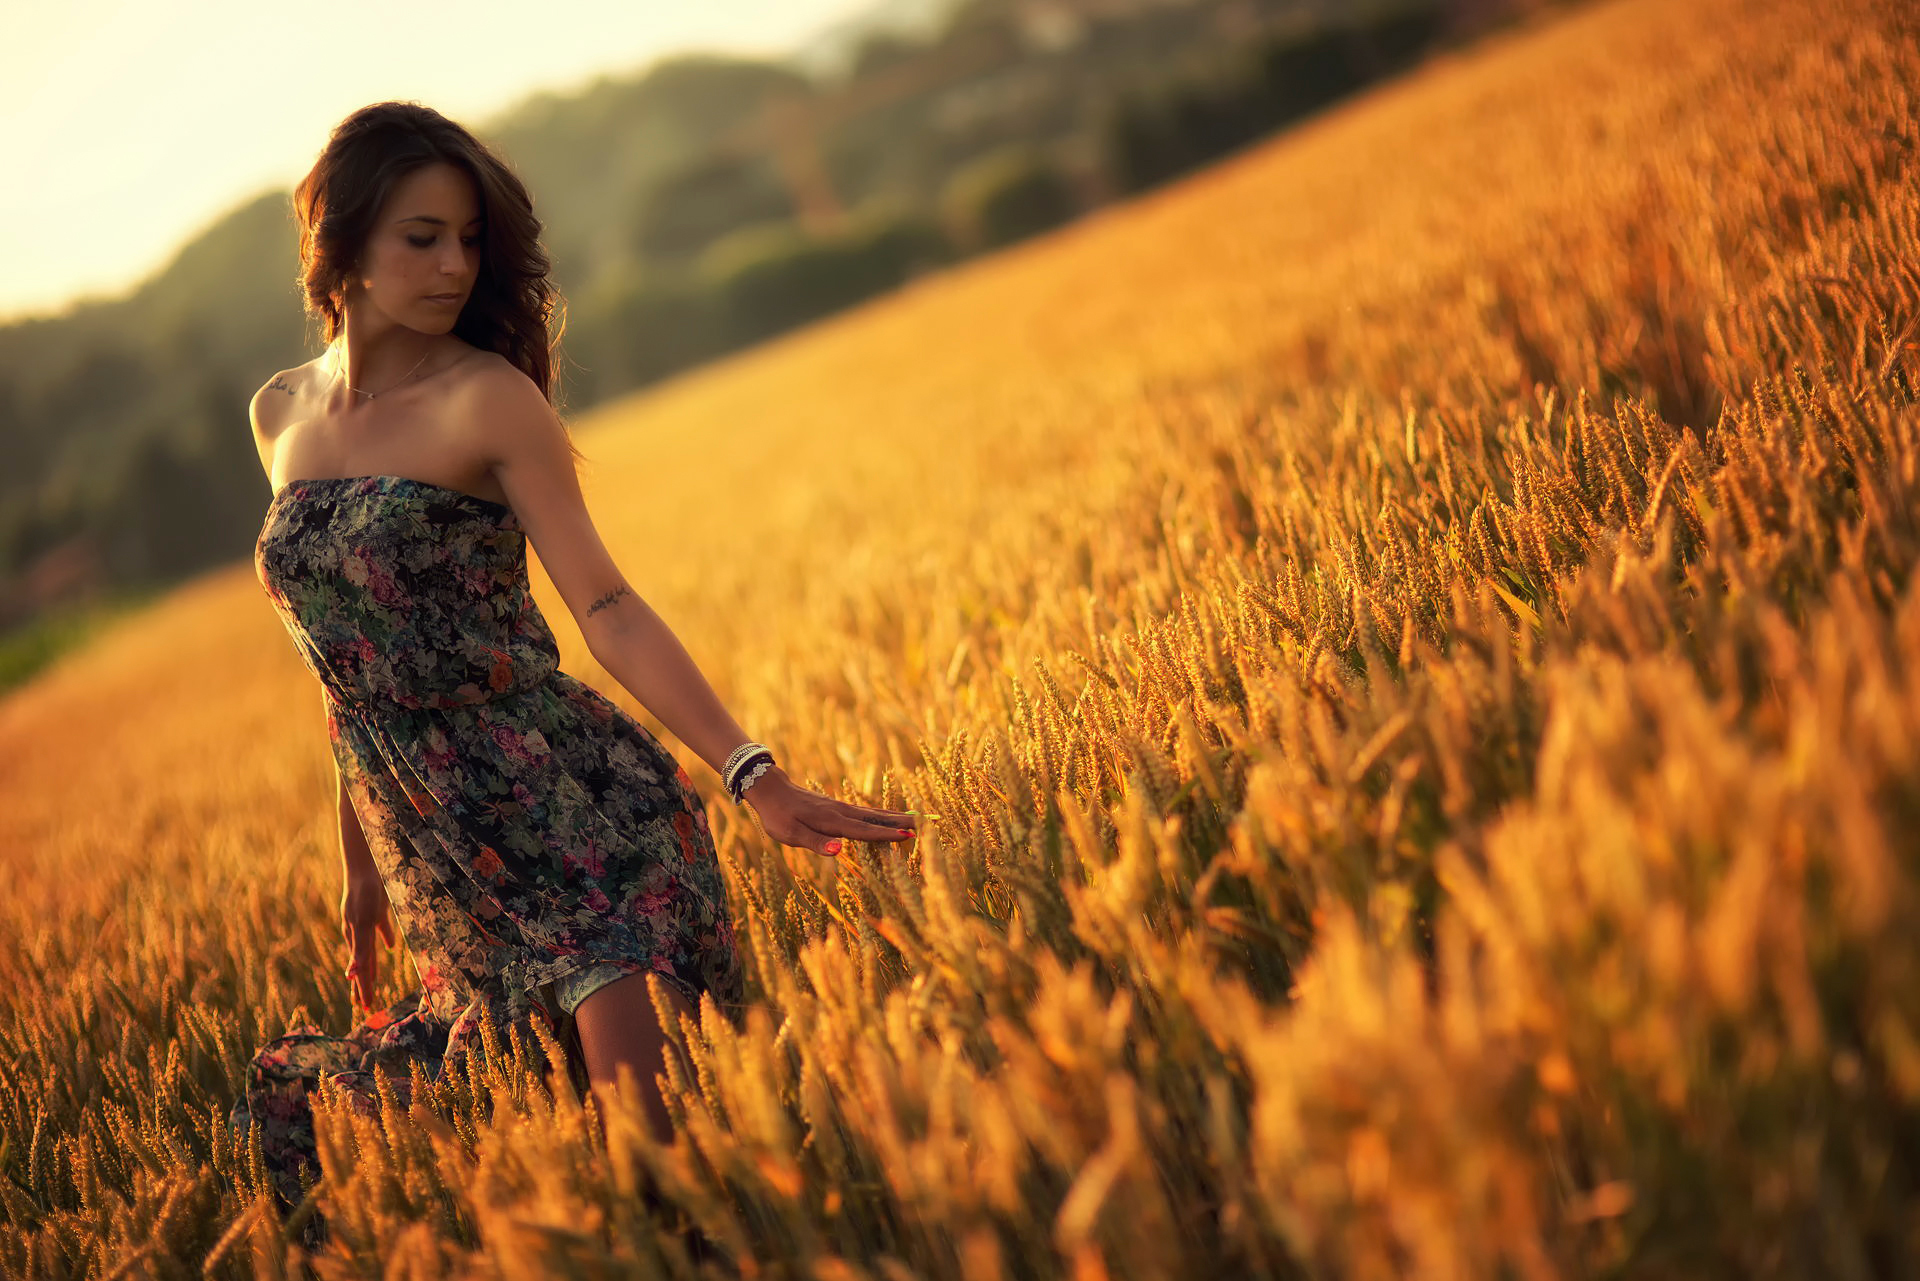 mood wallpaper,people in nature,nature,field,beauty,yellow